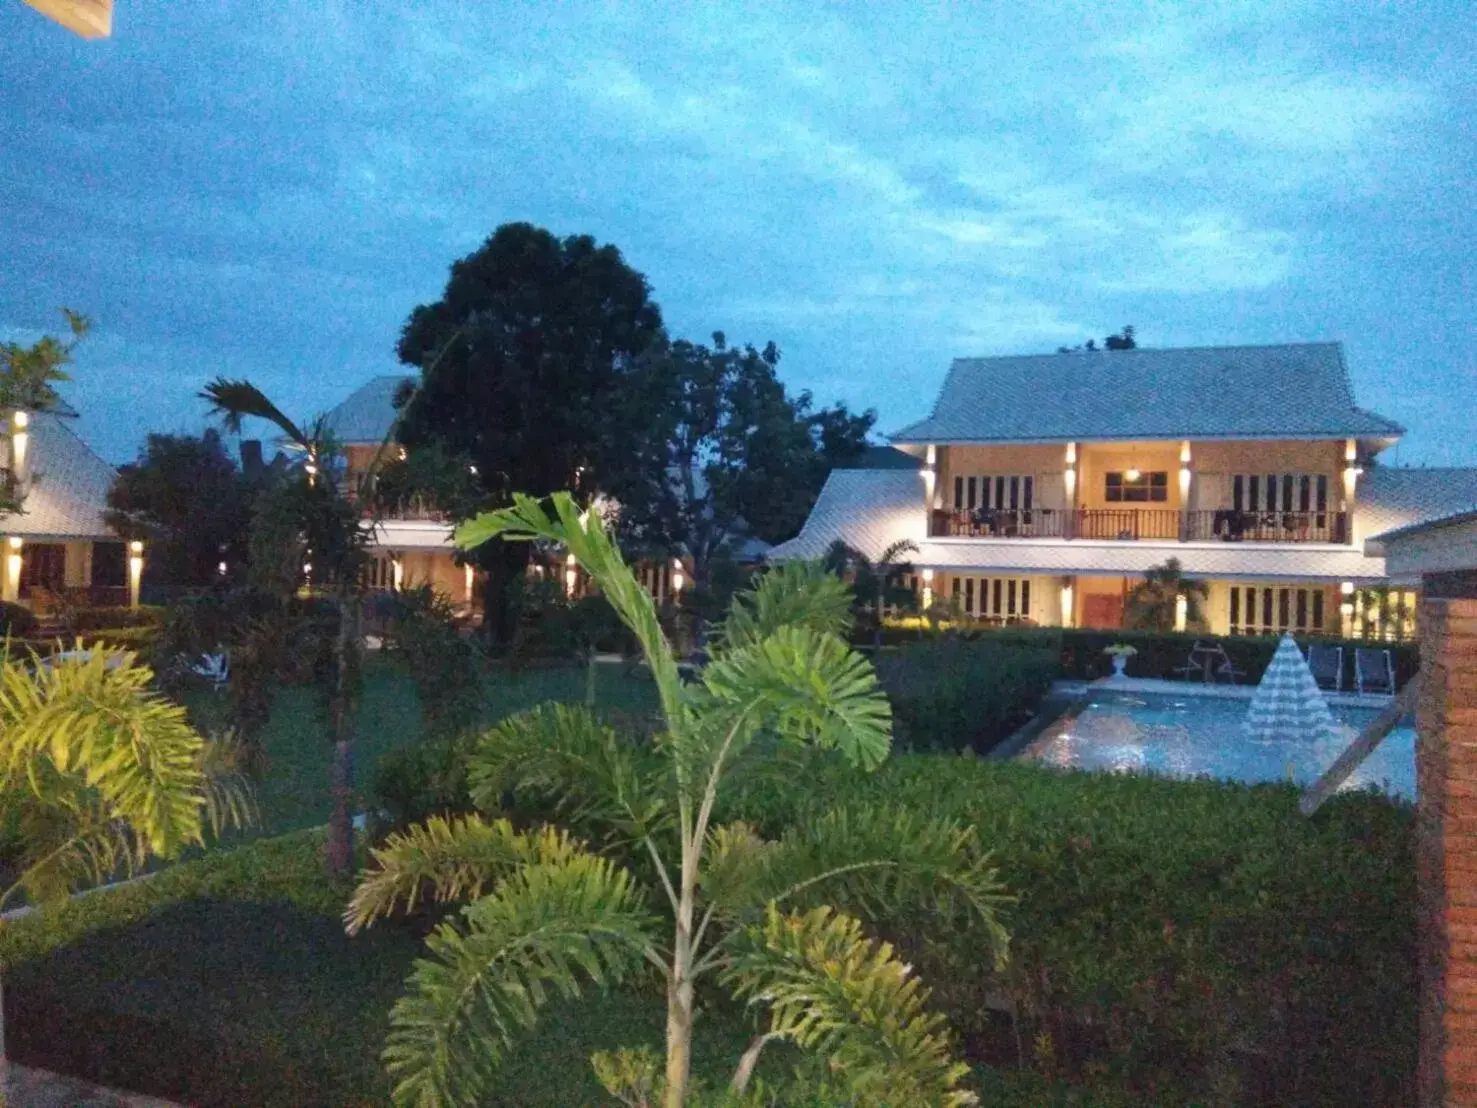 Area and facilities, Property Building in Scent of Sukhothai Resort